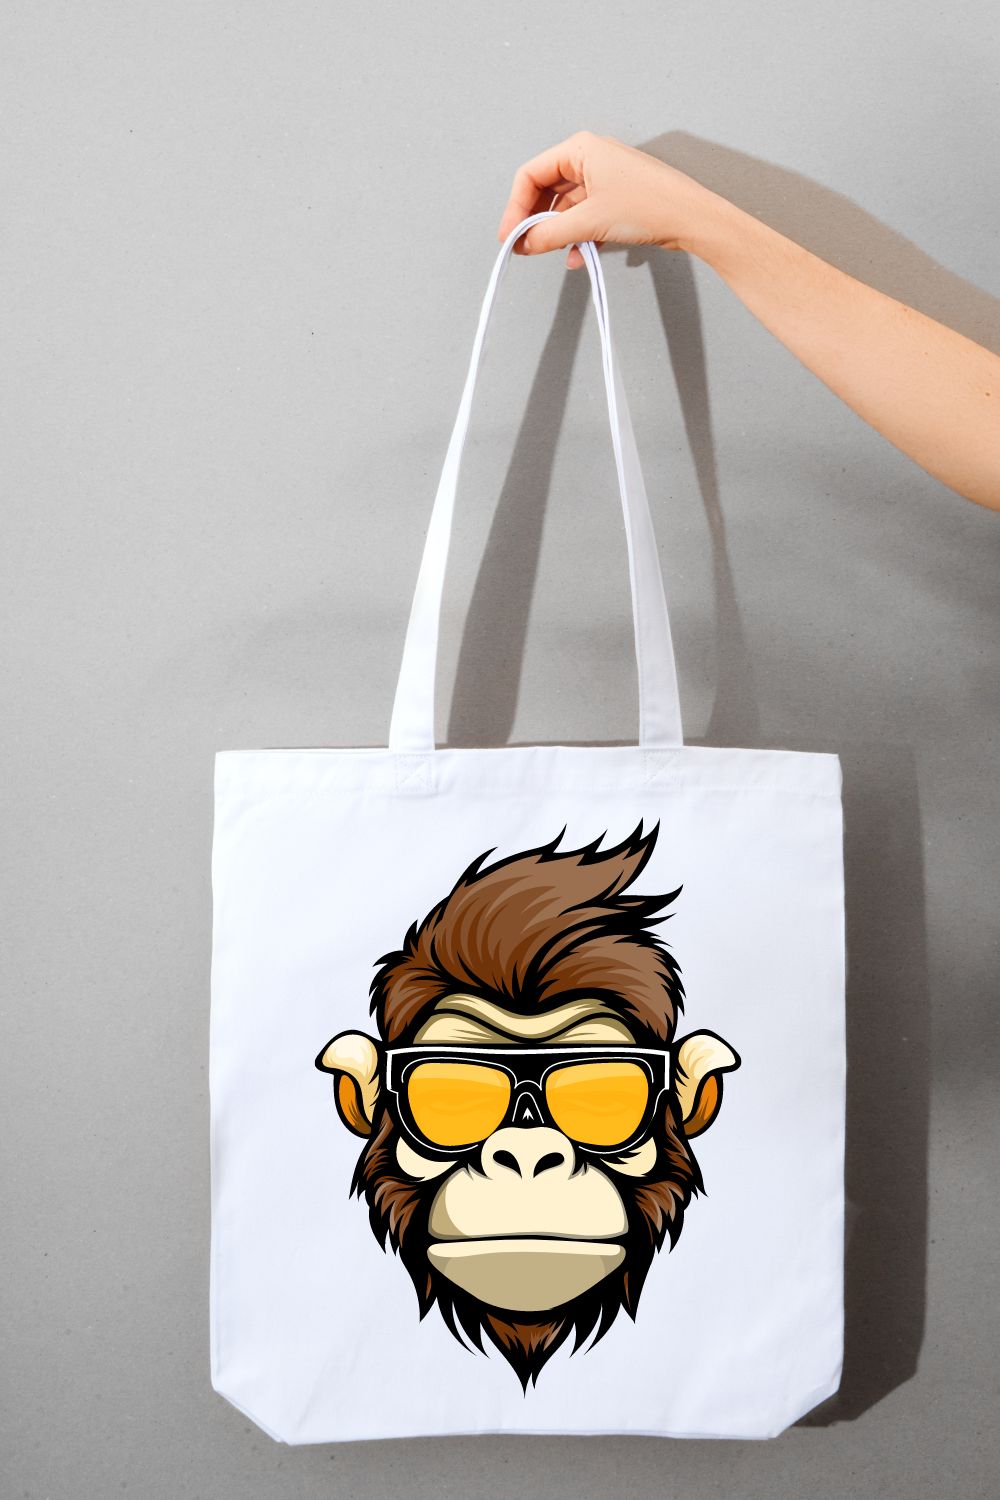 Cute and funny monkey face design pinterest preview image.